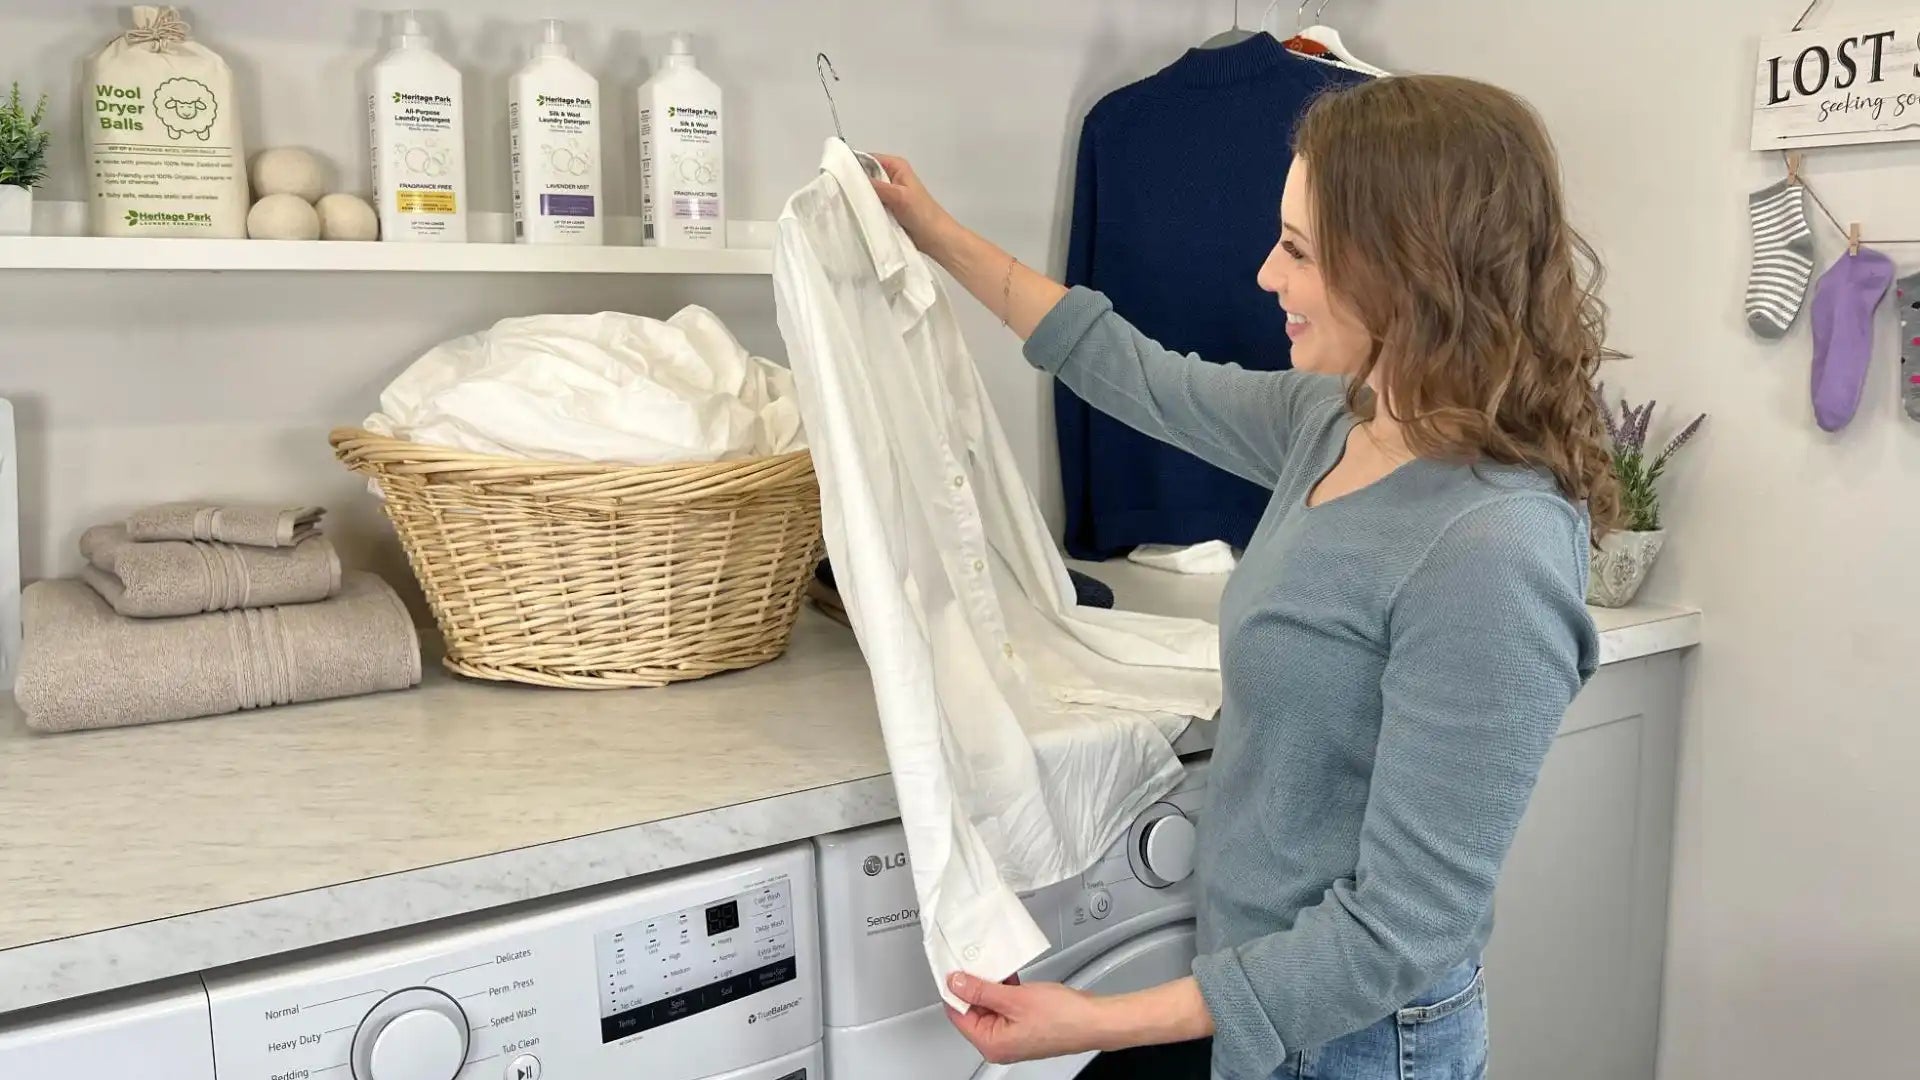 How To Use A Mesh Laundry Bag to Protect Delicates in the Wash - Heritage  Park Laundry Essentials